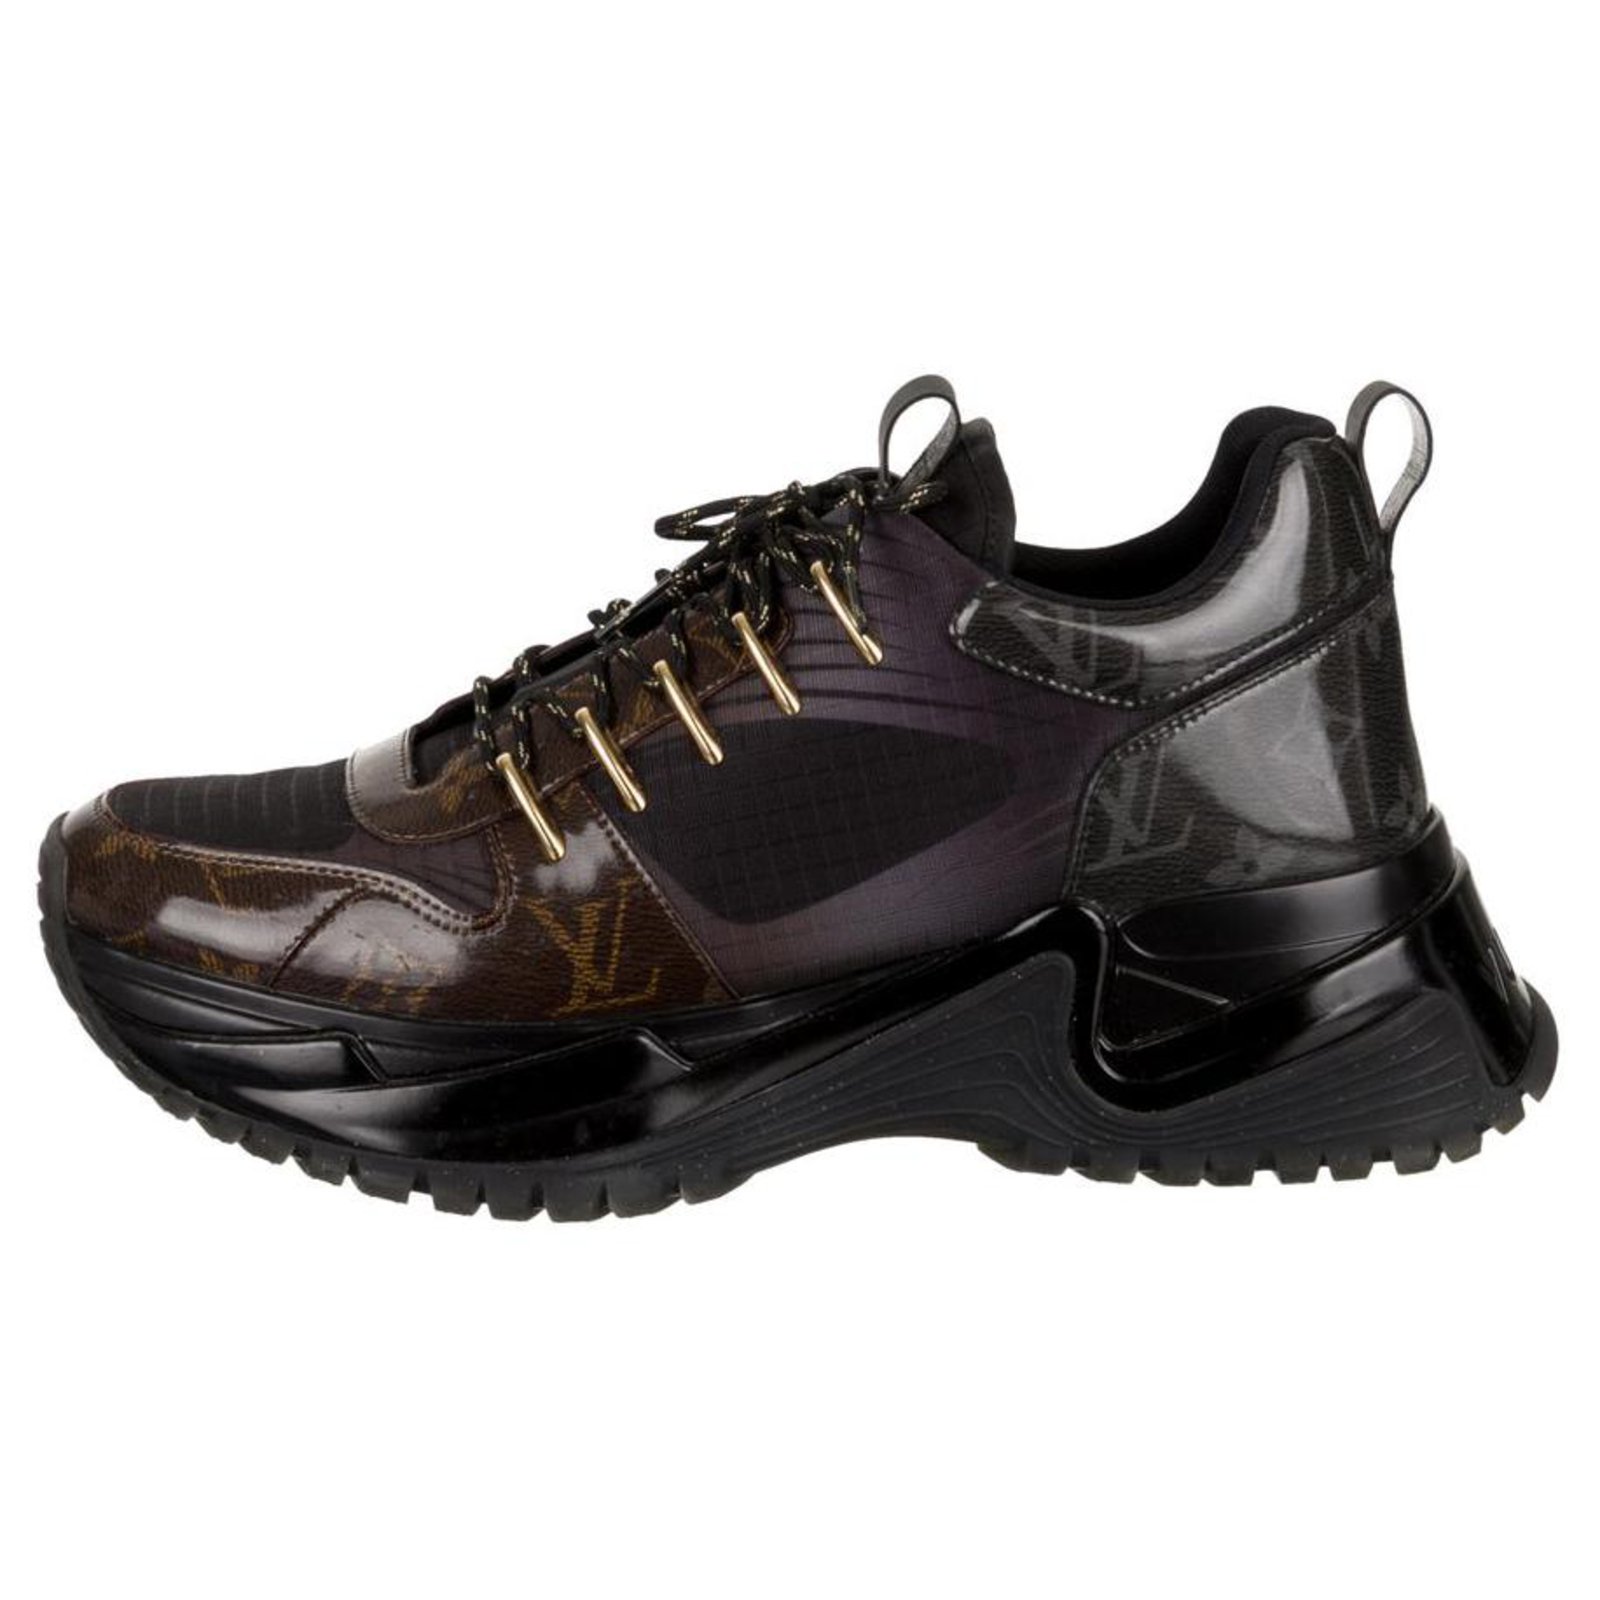 Louis Vuitton Louis Vuitton sneakers run away pulse Sneakers Leather,Synthetic,Cloth Brown,Black ...